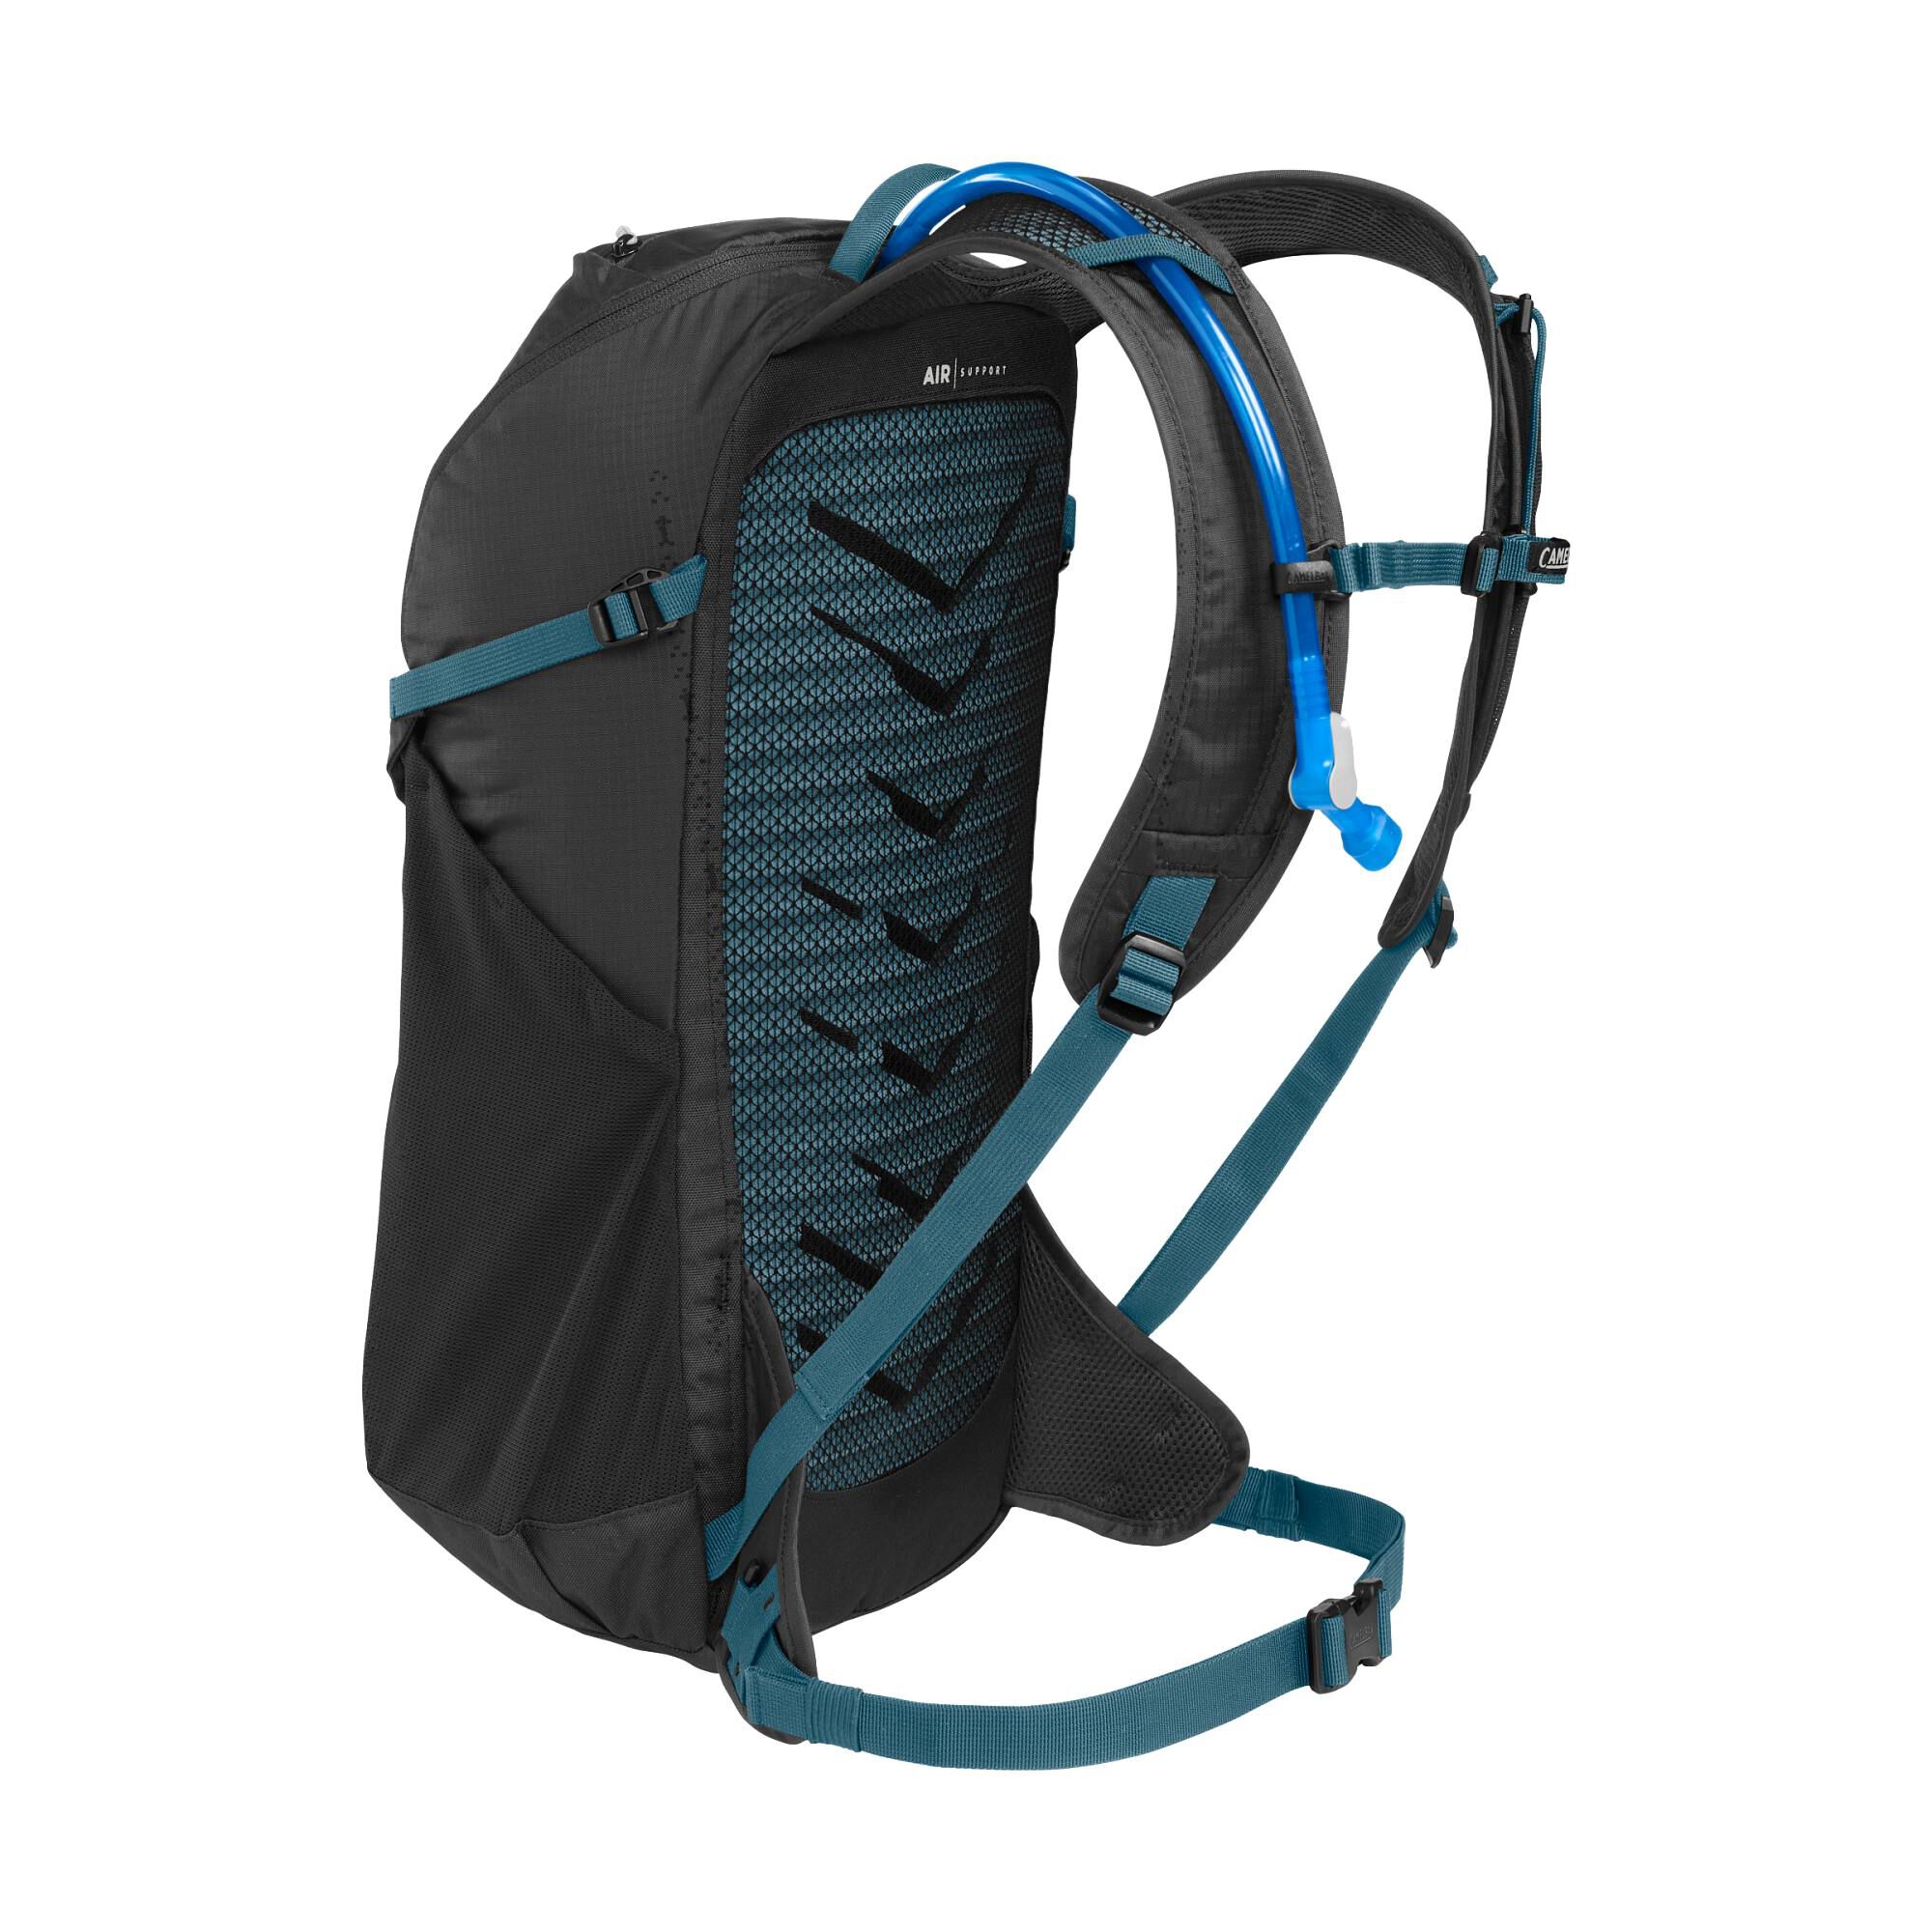 Rim Runner™ X22 Hiking Hydration Pack with Crux® 1.5L Reservoir